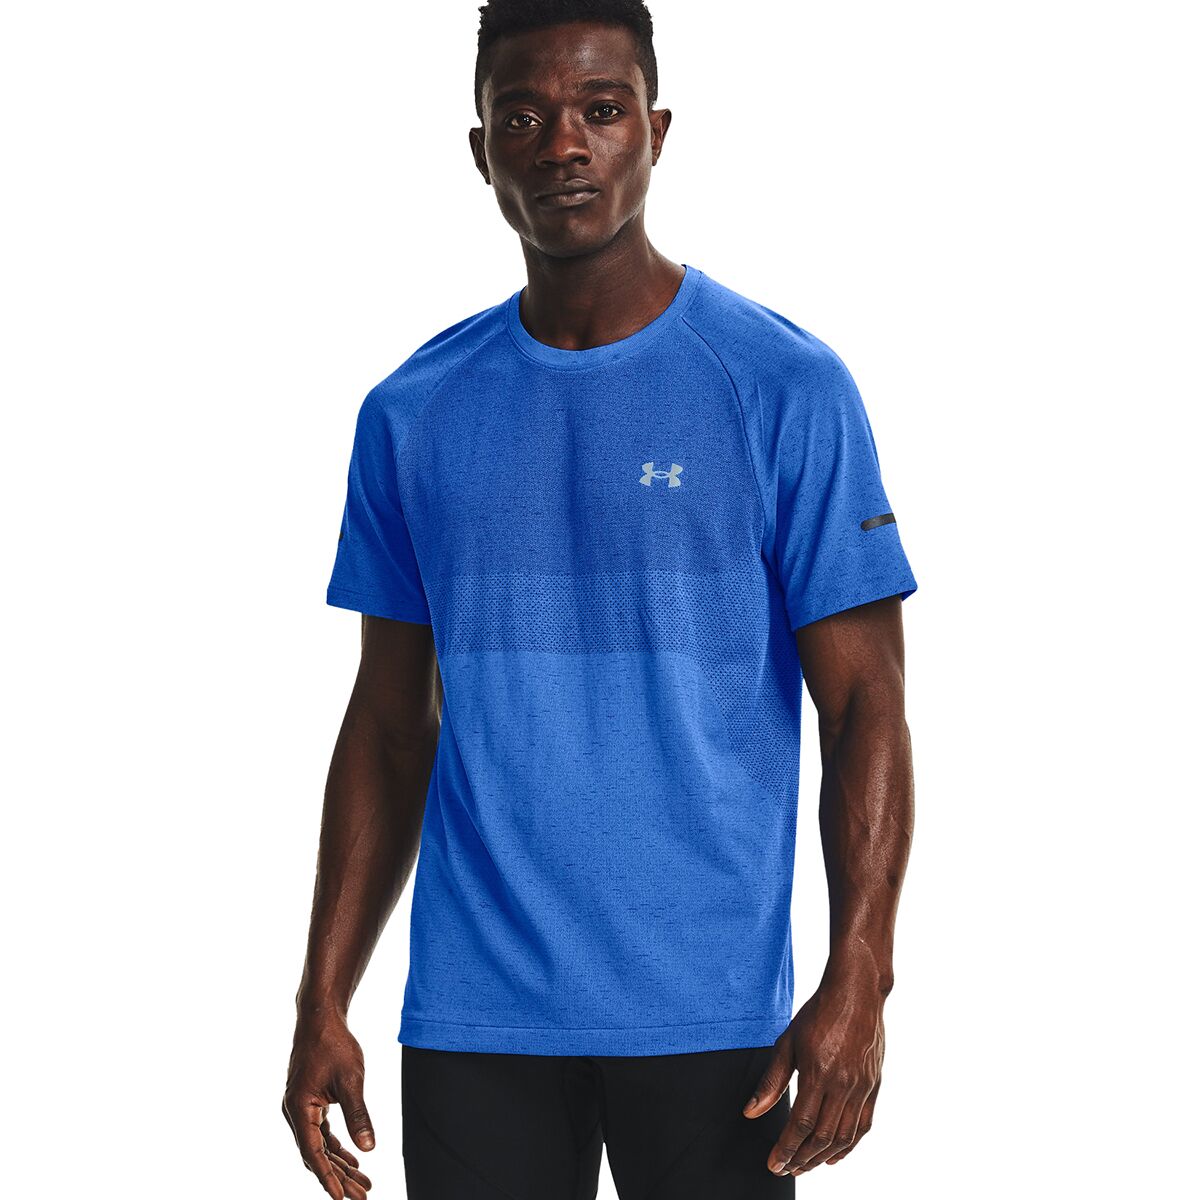 Under Armour Mens Vanish Seamless Mens T Shirt with Tight Cut Cool and Breathable Running Apparel for Men